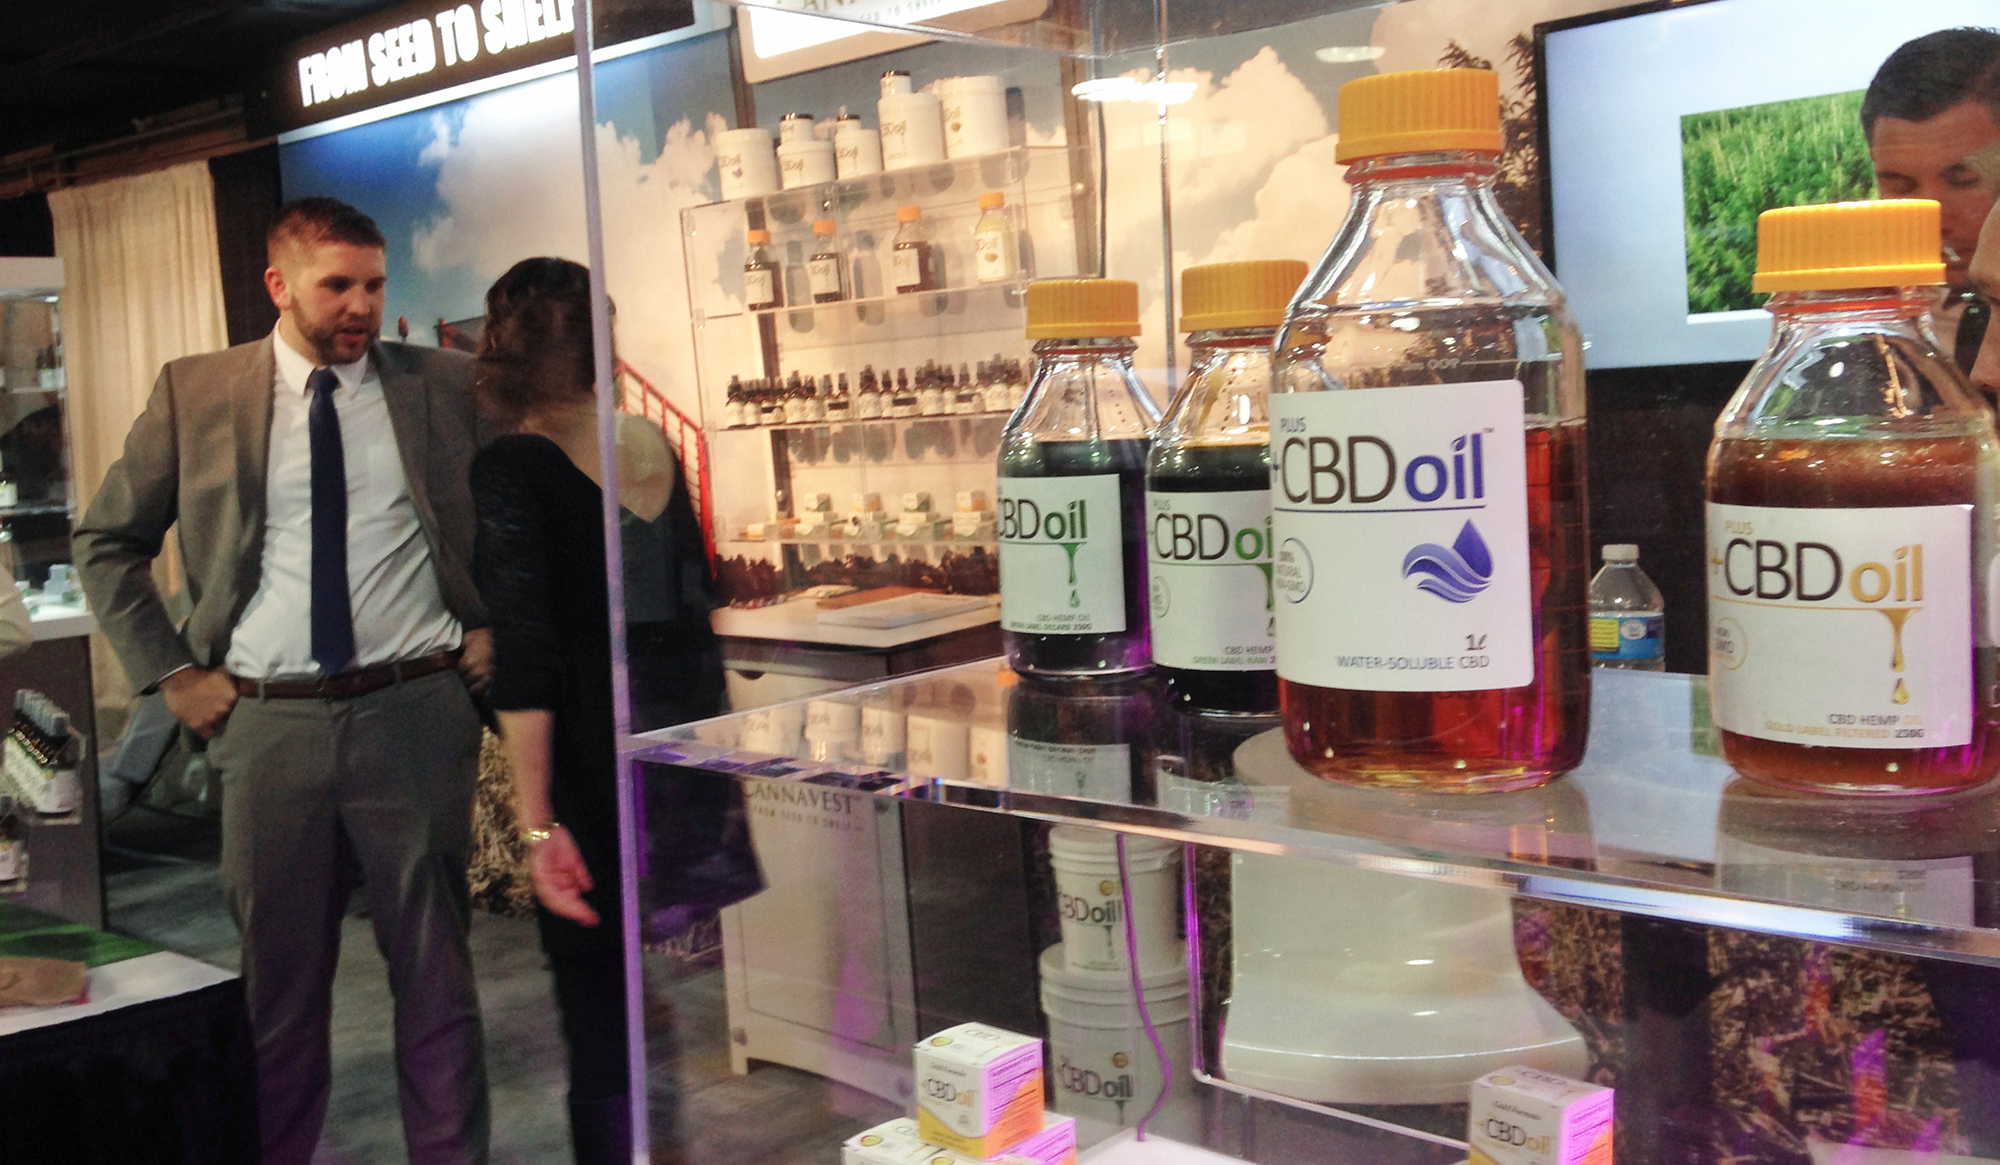 The Marijuana Business Conference & Expo in Chicago in 2015 displayed oil containing CBD extracted from agricultural hemp. Today CBD oil alone is estimated to be a $200 million industry. CREDIT: CARLA K. JOHNSON